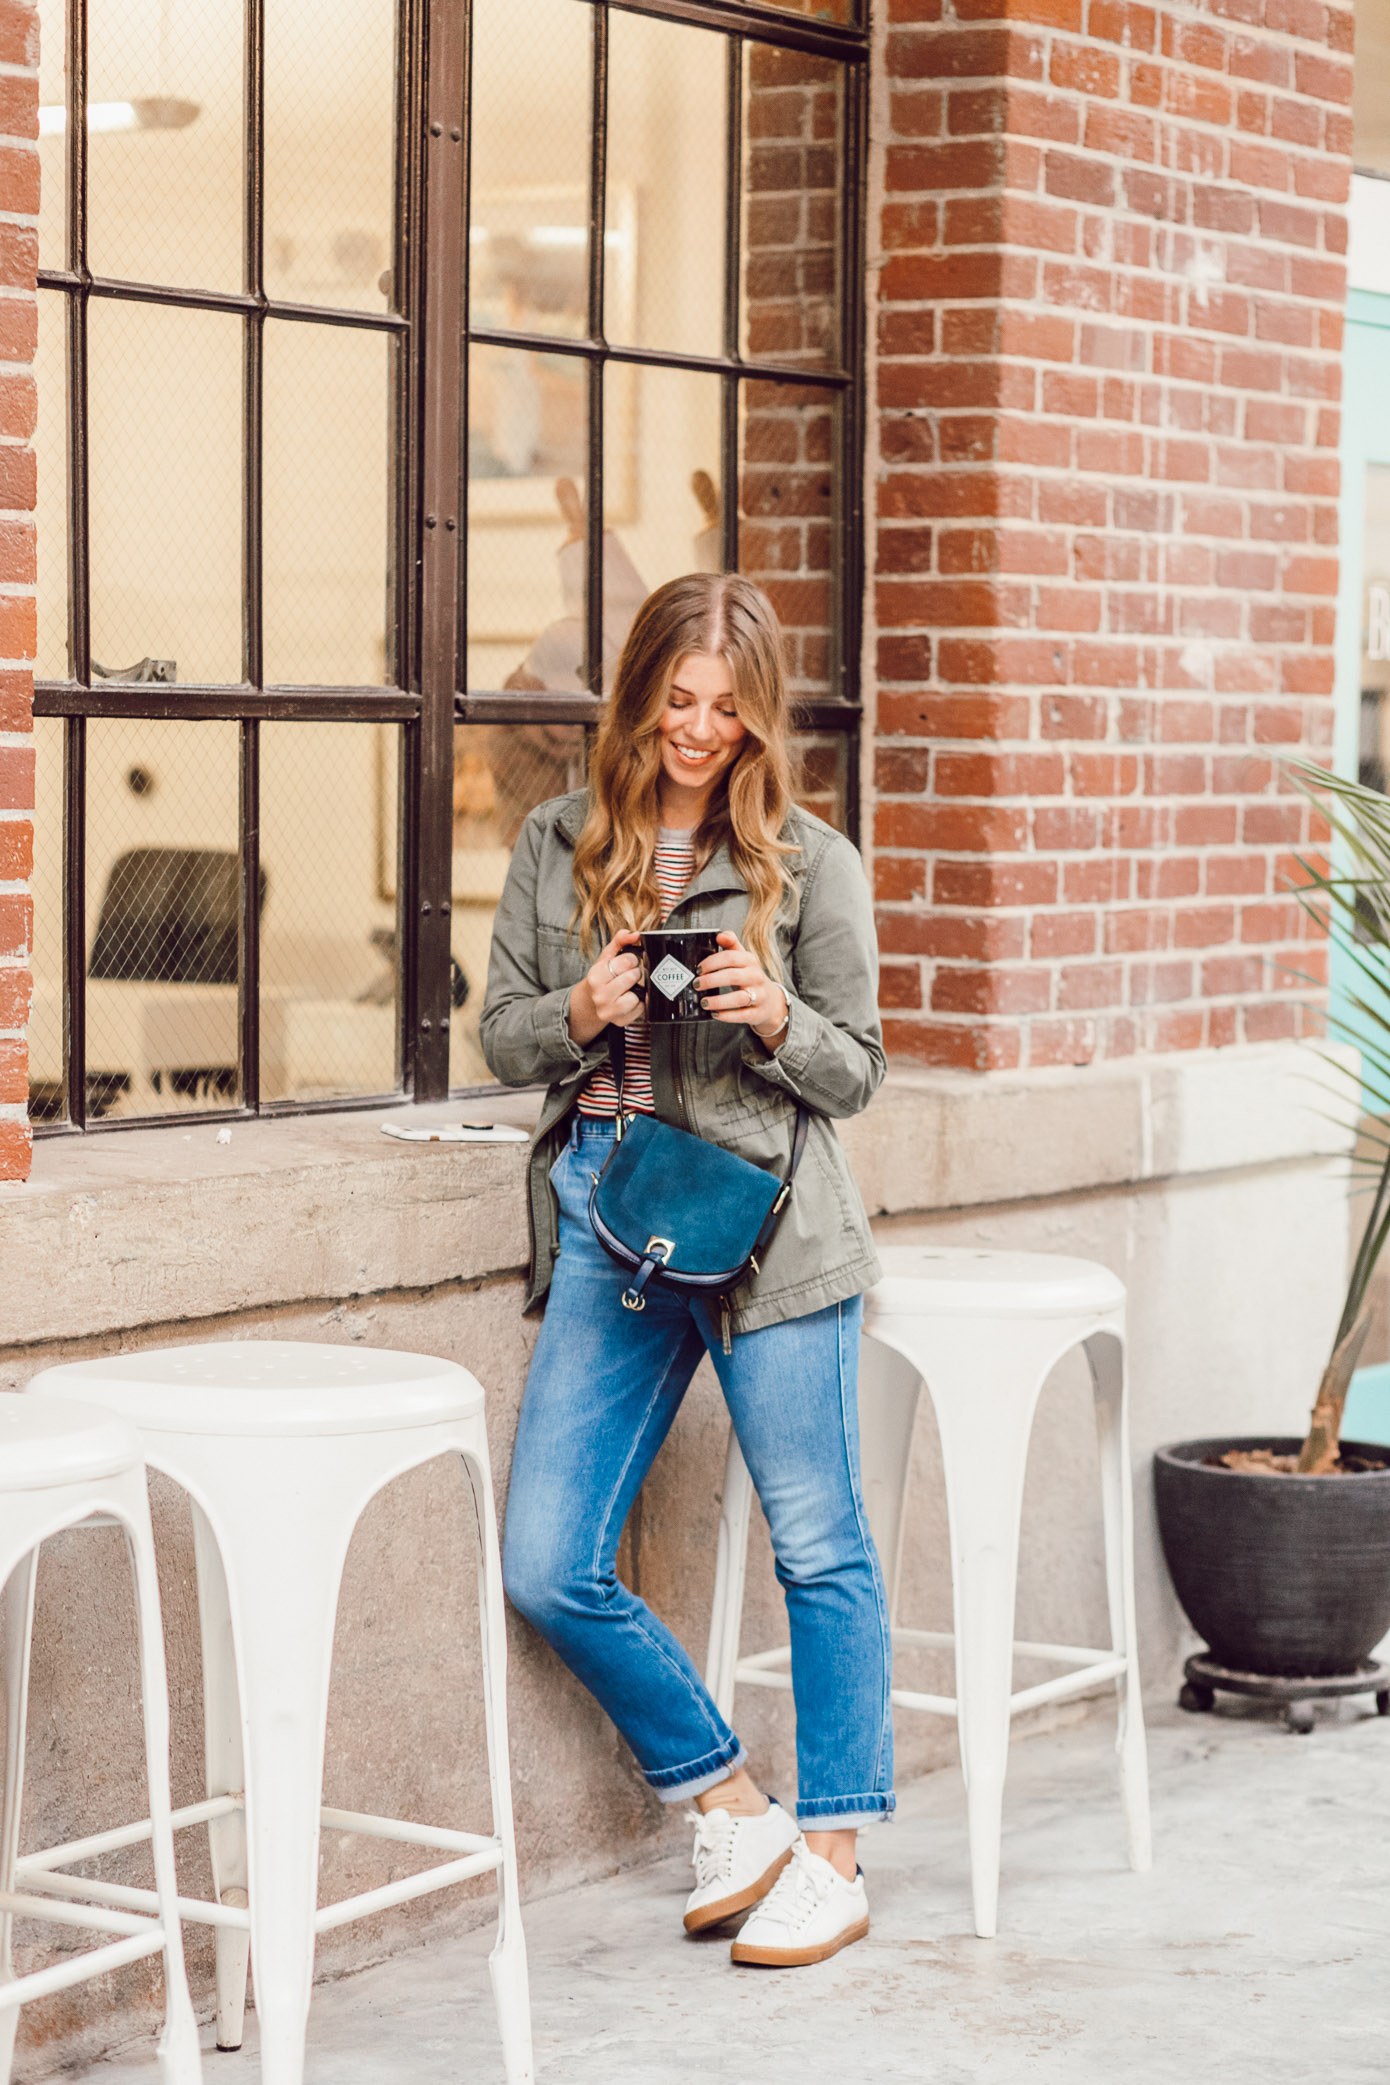 Most Instagrammable Charlotte Coffee Shops featured on Louella Reese | Madewell Fleet Jacket, Casual Fall Style